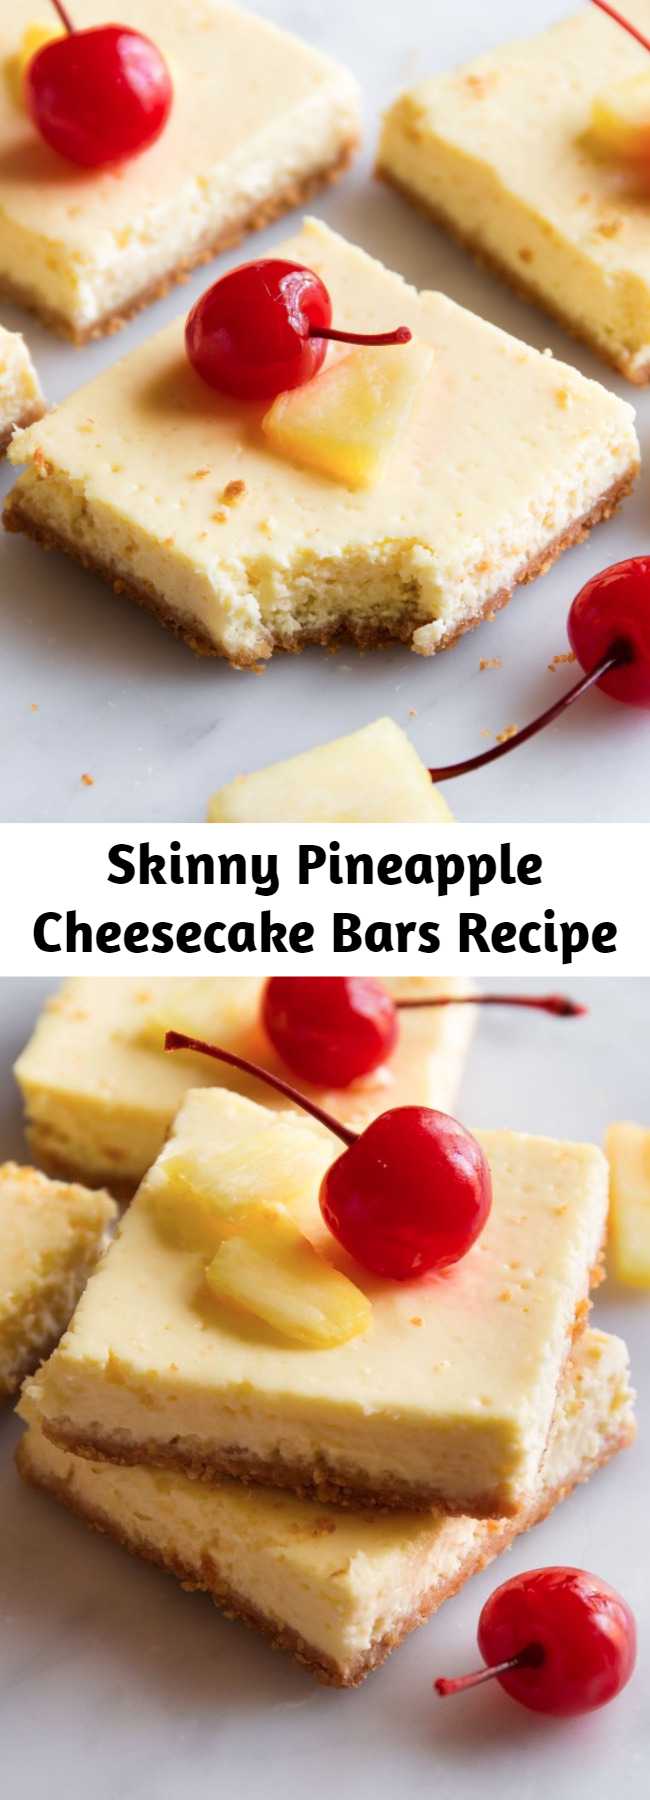 Skinny Pineapple Cheesecake Bars Recipe - The best news we've heard so far this year is that these bars are only 130 calories. Transport yourself to the tropics with these lightened-up cheesecake bars.